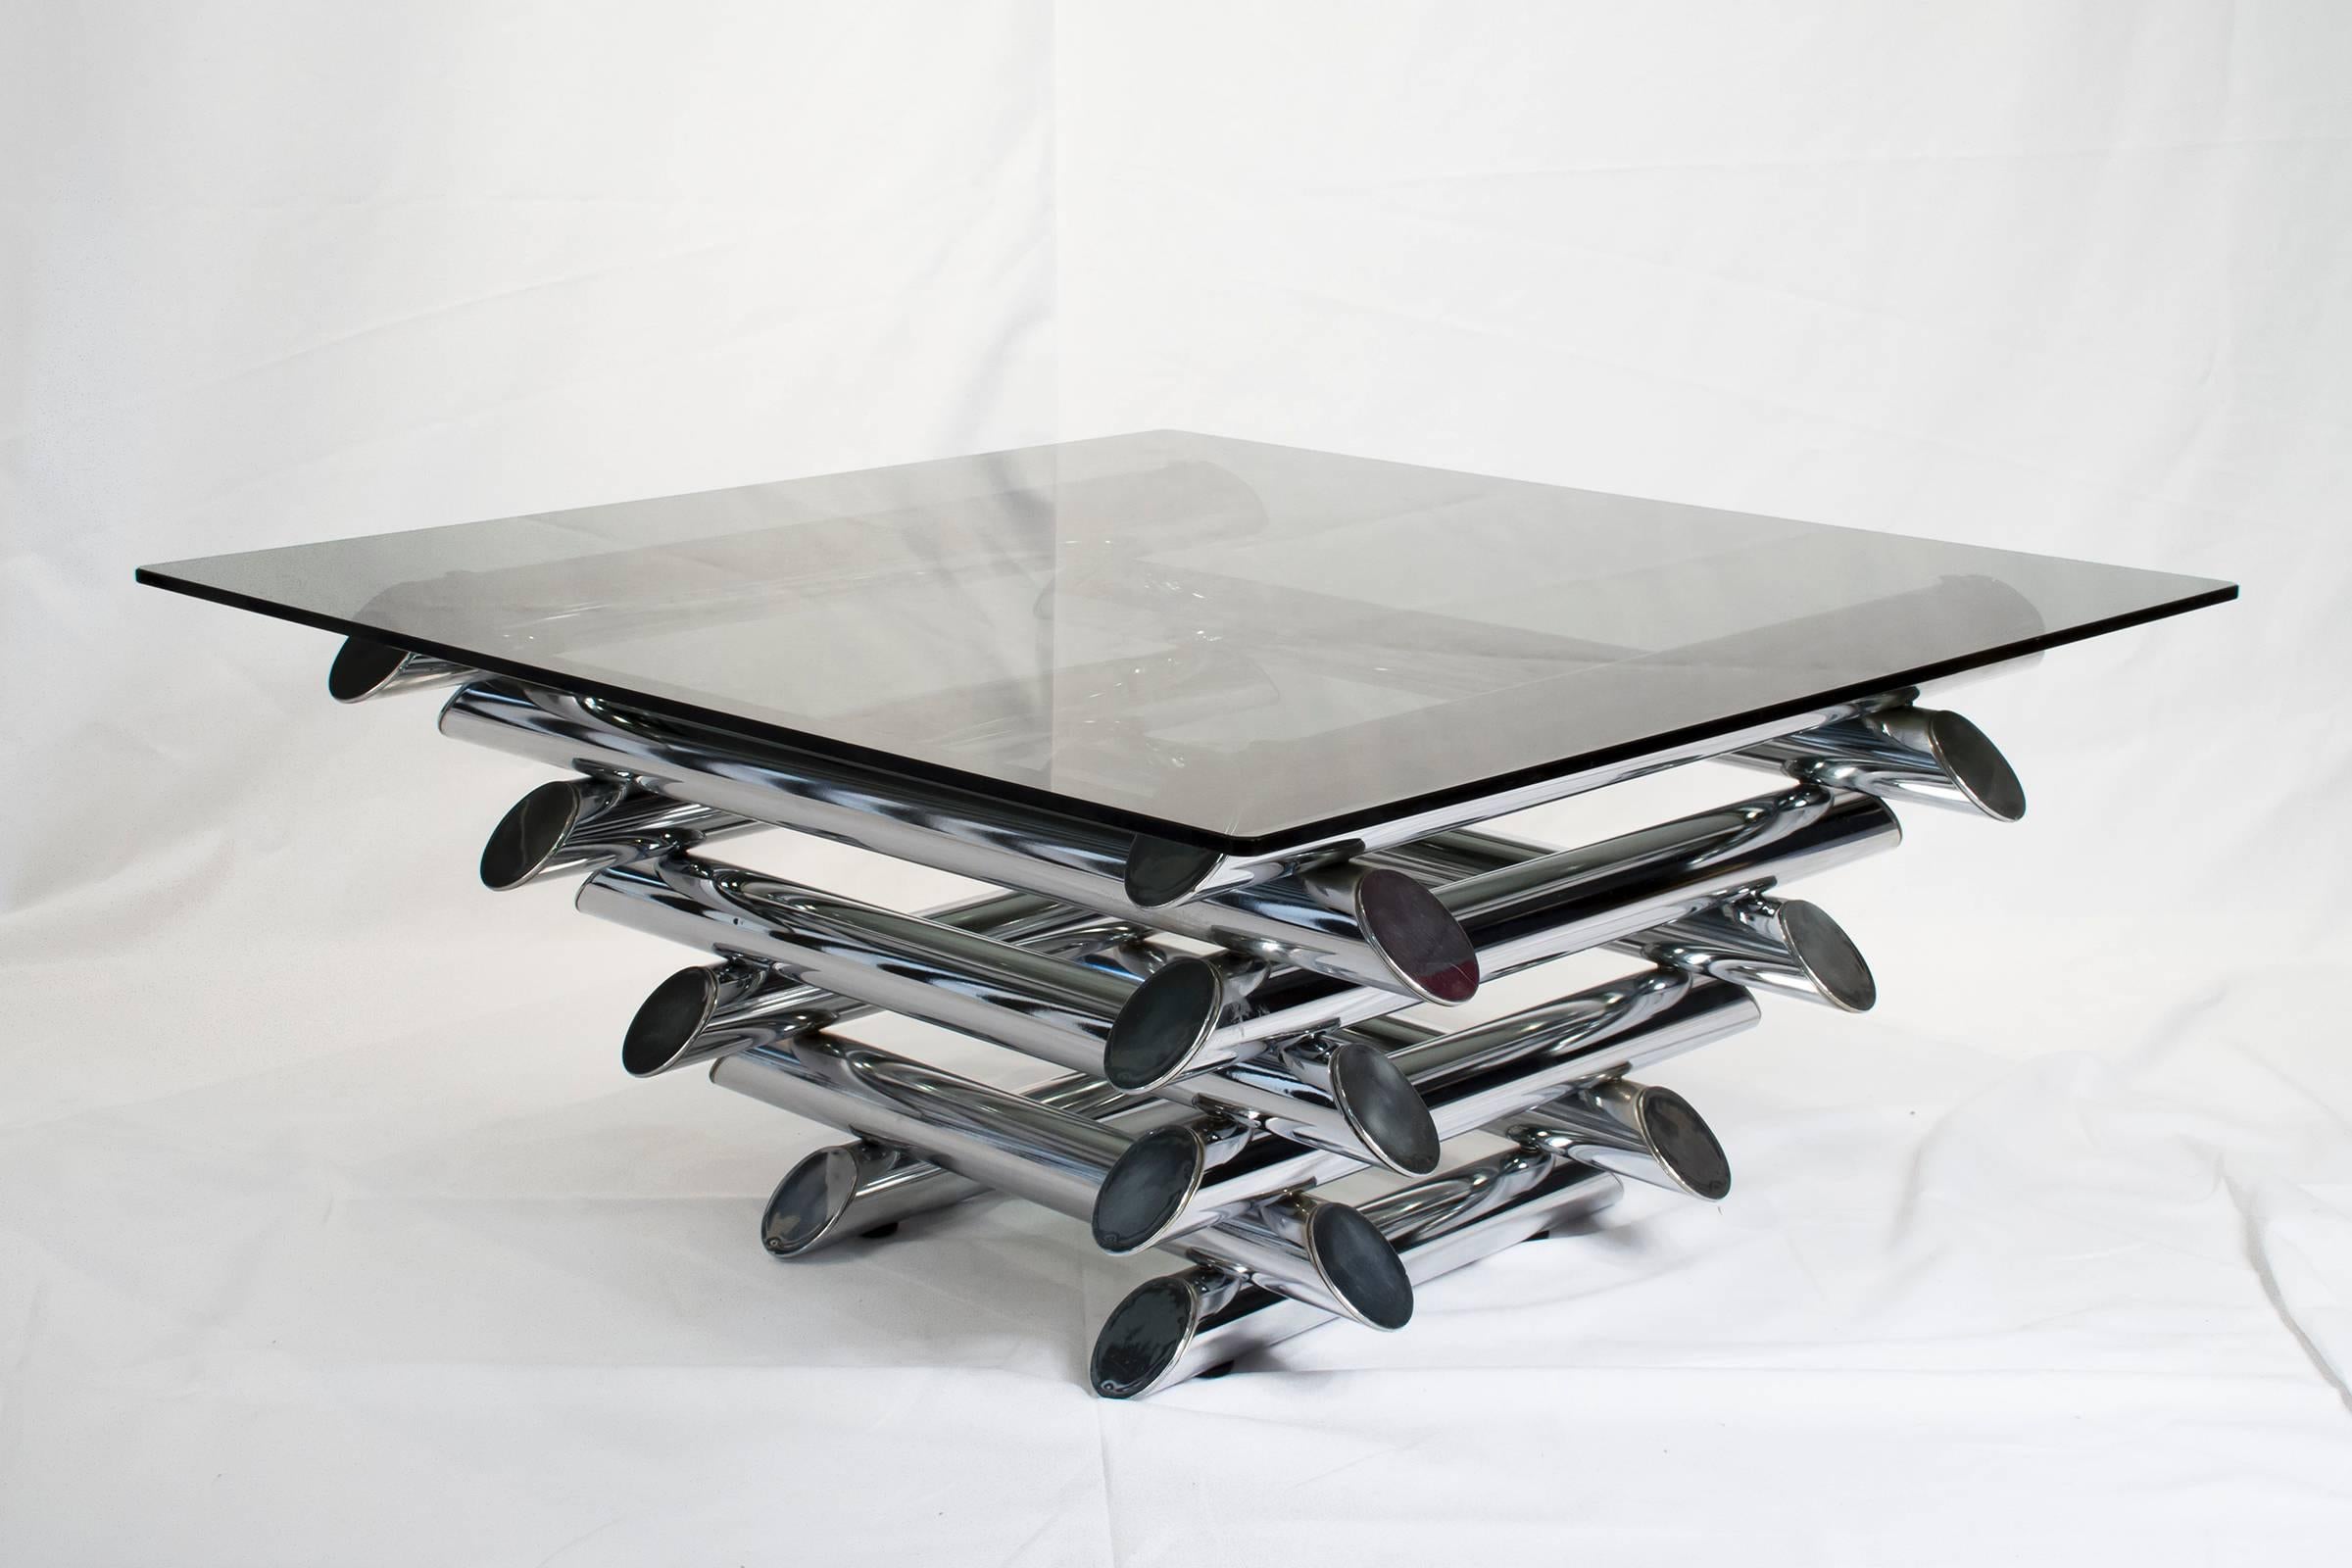 French Mid-Century Modern tubular chrome coffee table. Tiered metal coffee table with blue smoked glass top.

Please look at our storefront page to browse our entire collection.
Please contact us for delivery details.